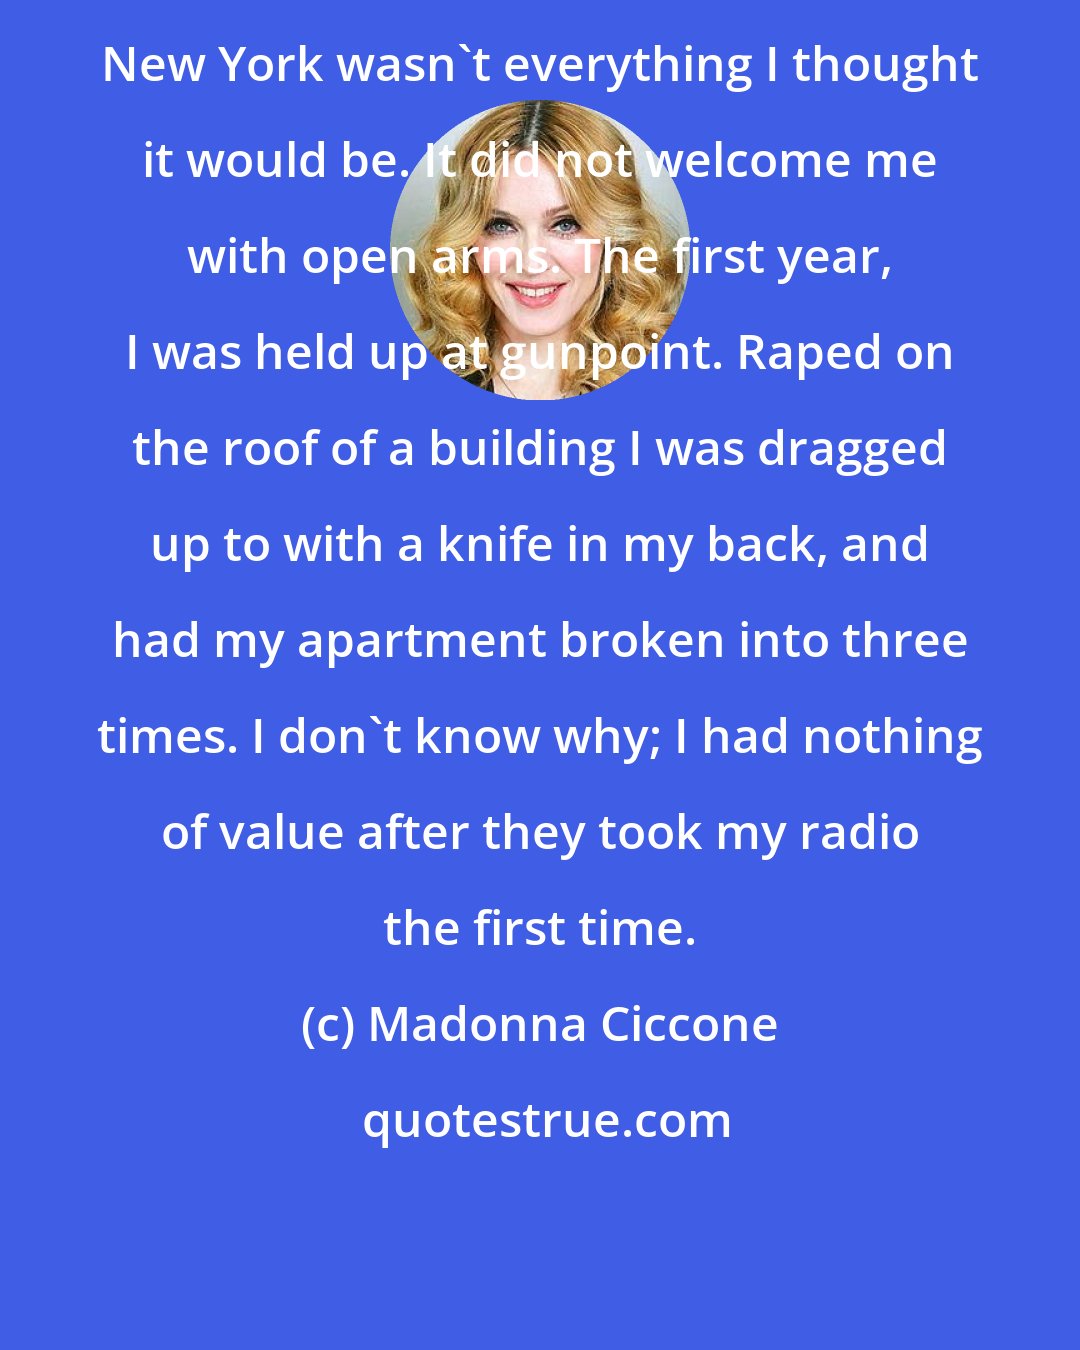 Madonna Ciccone: New York wasn't everything I thought it would be. It did not welcome me with open arms. The first year, I was held up at gunpoint. Raped on the roof of a building I was dragged up to with a knife in my back, and had my apartment broken into three times. I don't know why; I had nothing of value after they took my radio the first time.